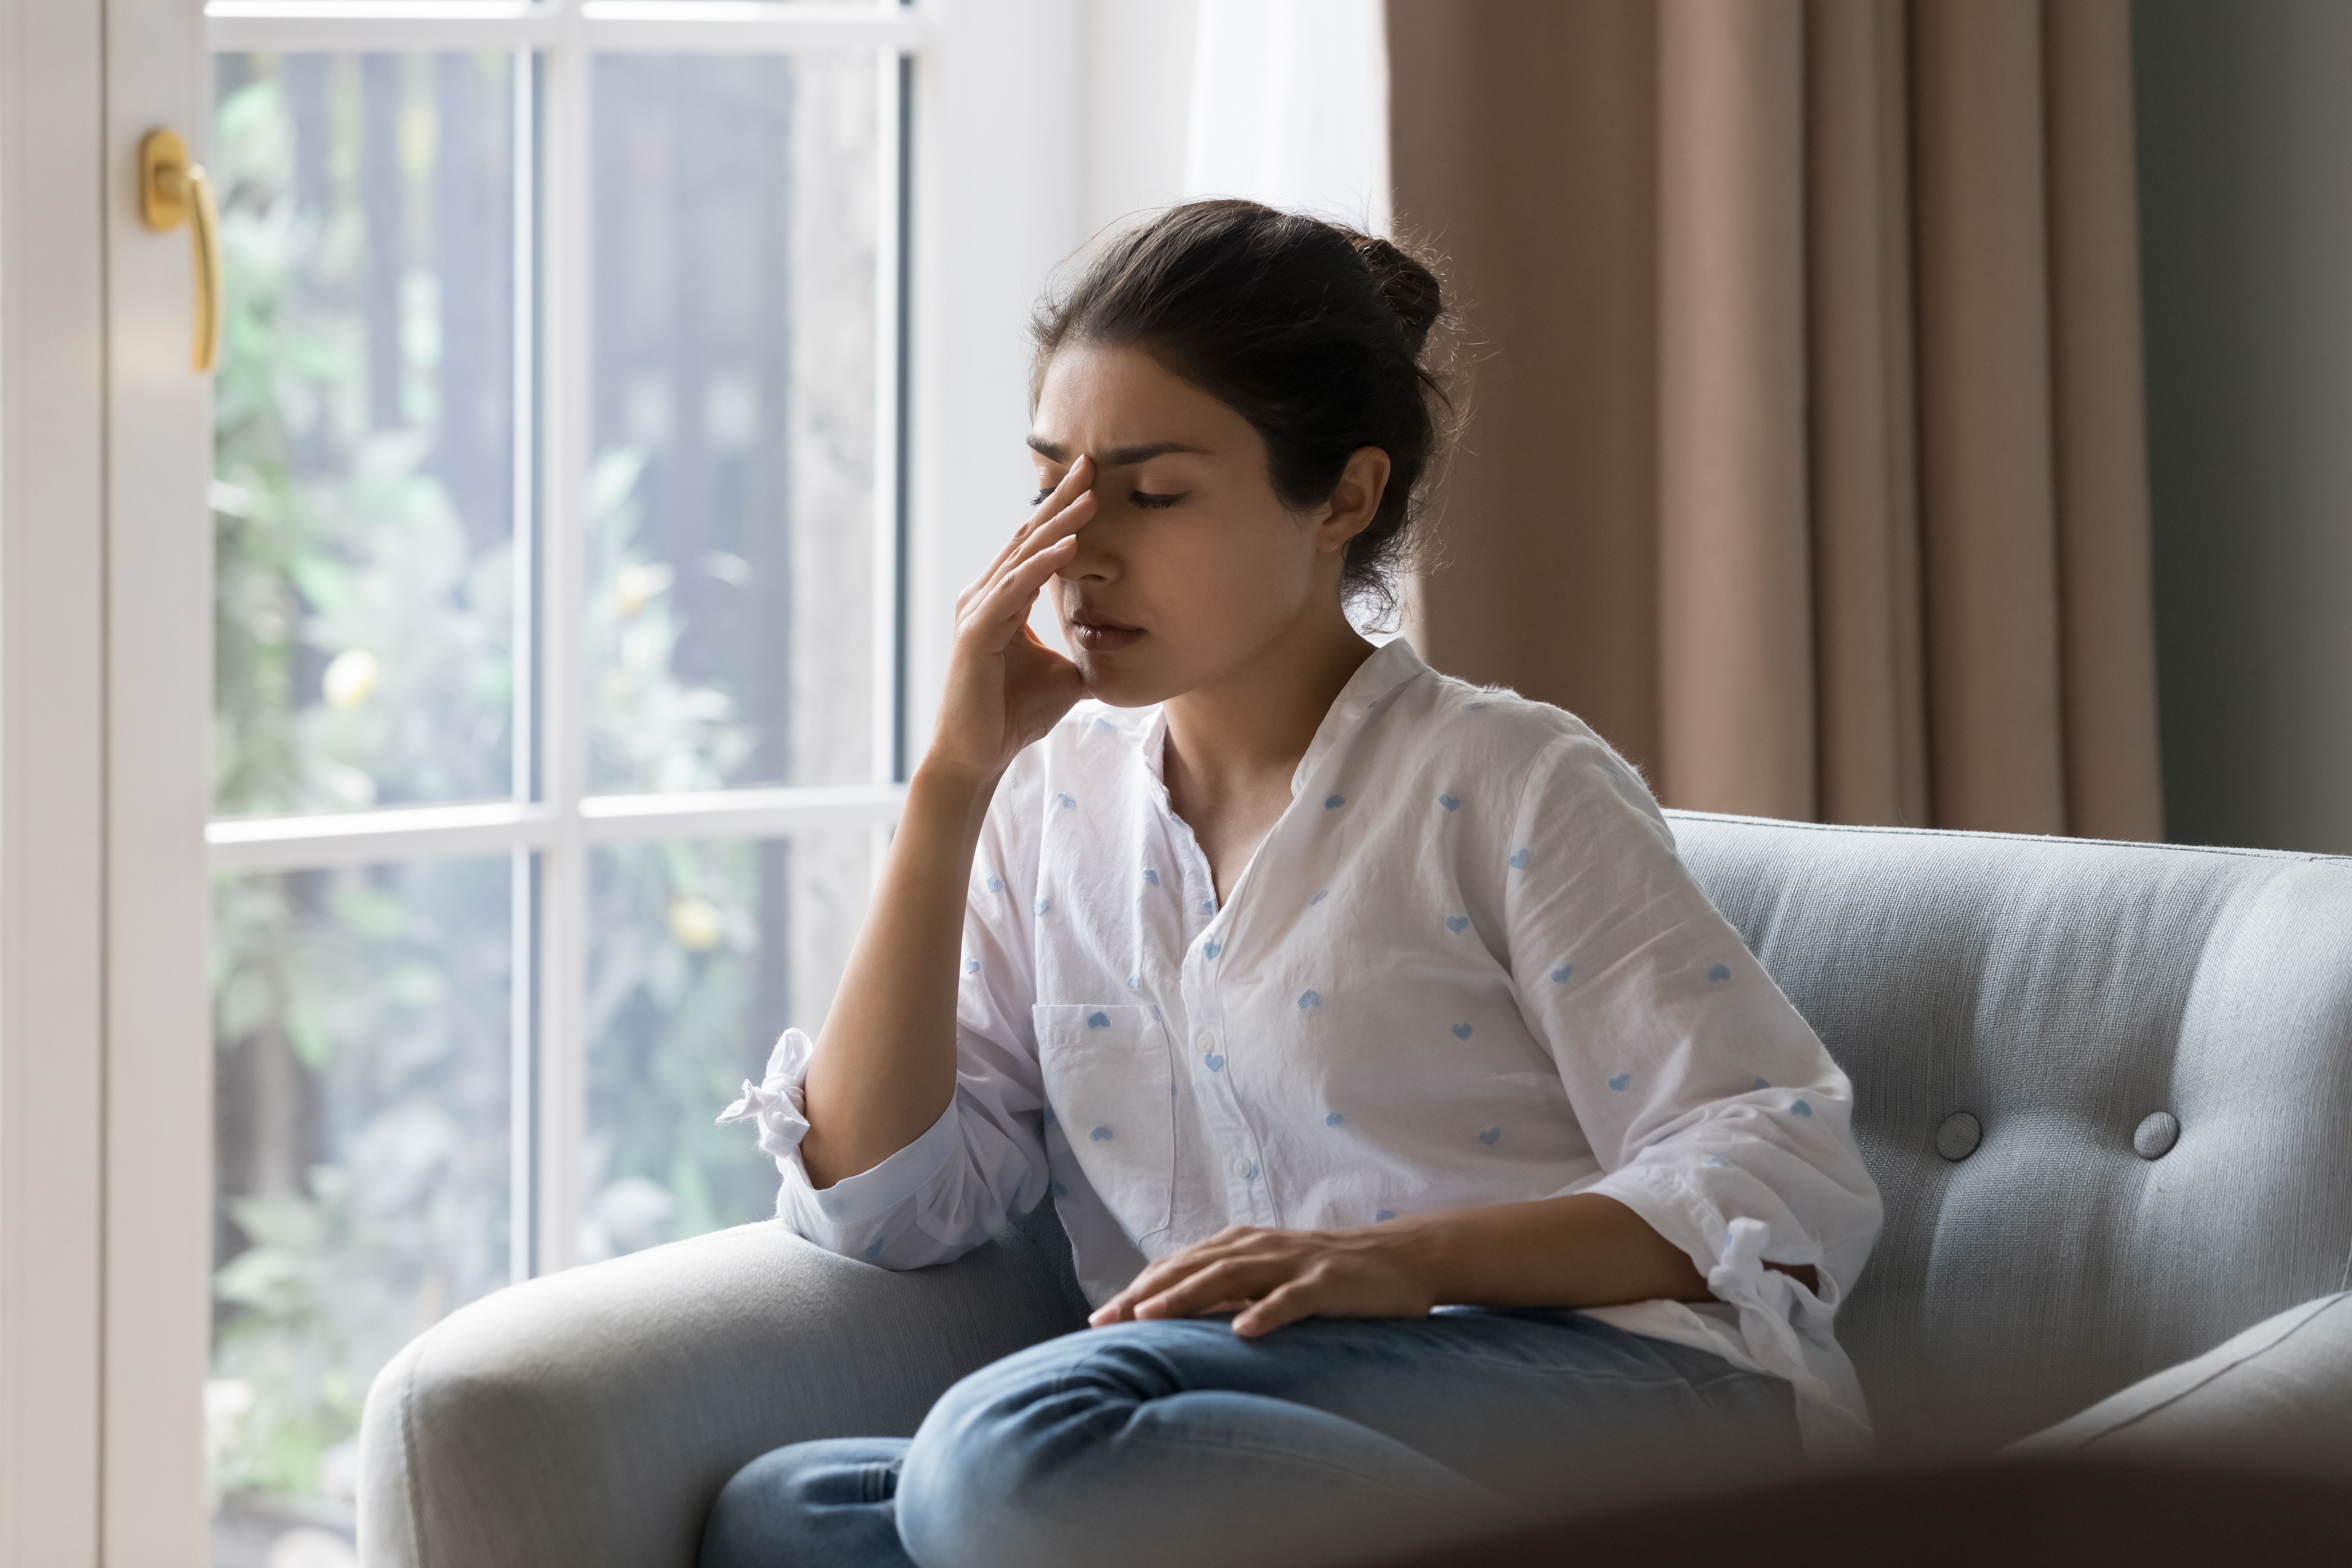 A frustrated woman sitting on a sofa | Source: Shutterstock